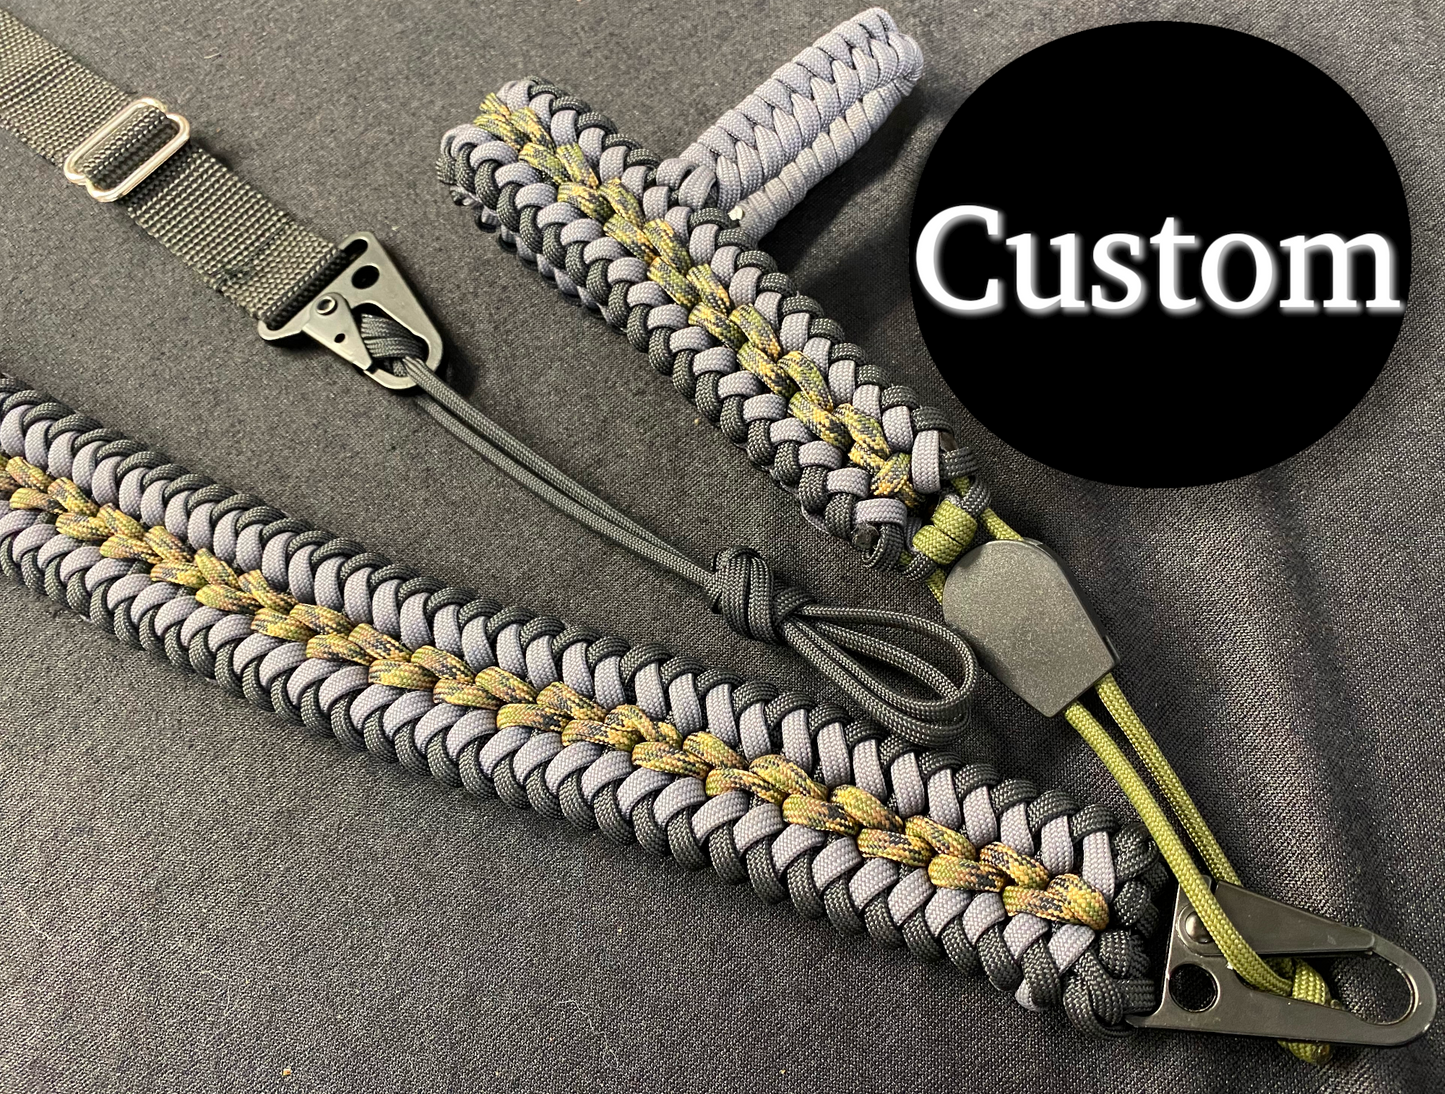 Custom Adjustable Paracord Sanctifed No-Drill Rifle Sling, Choose Your Colors and Stock Holder Type